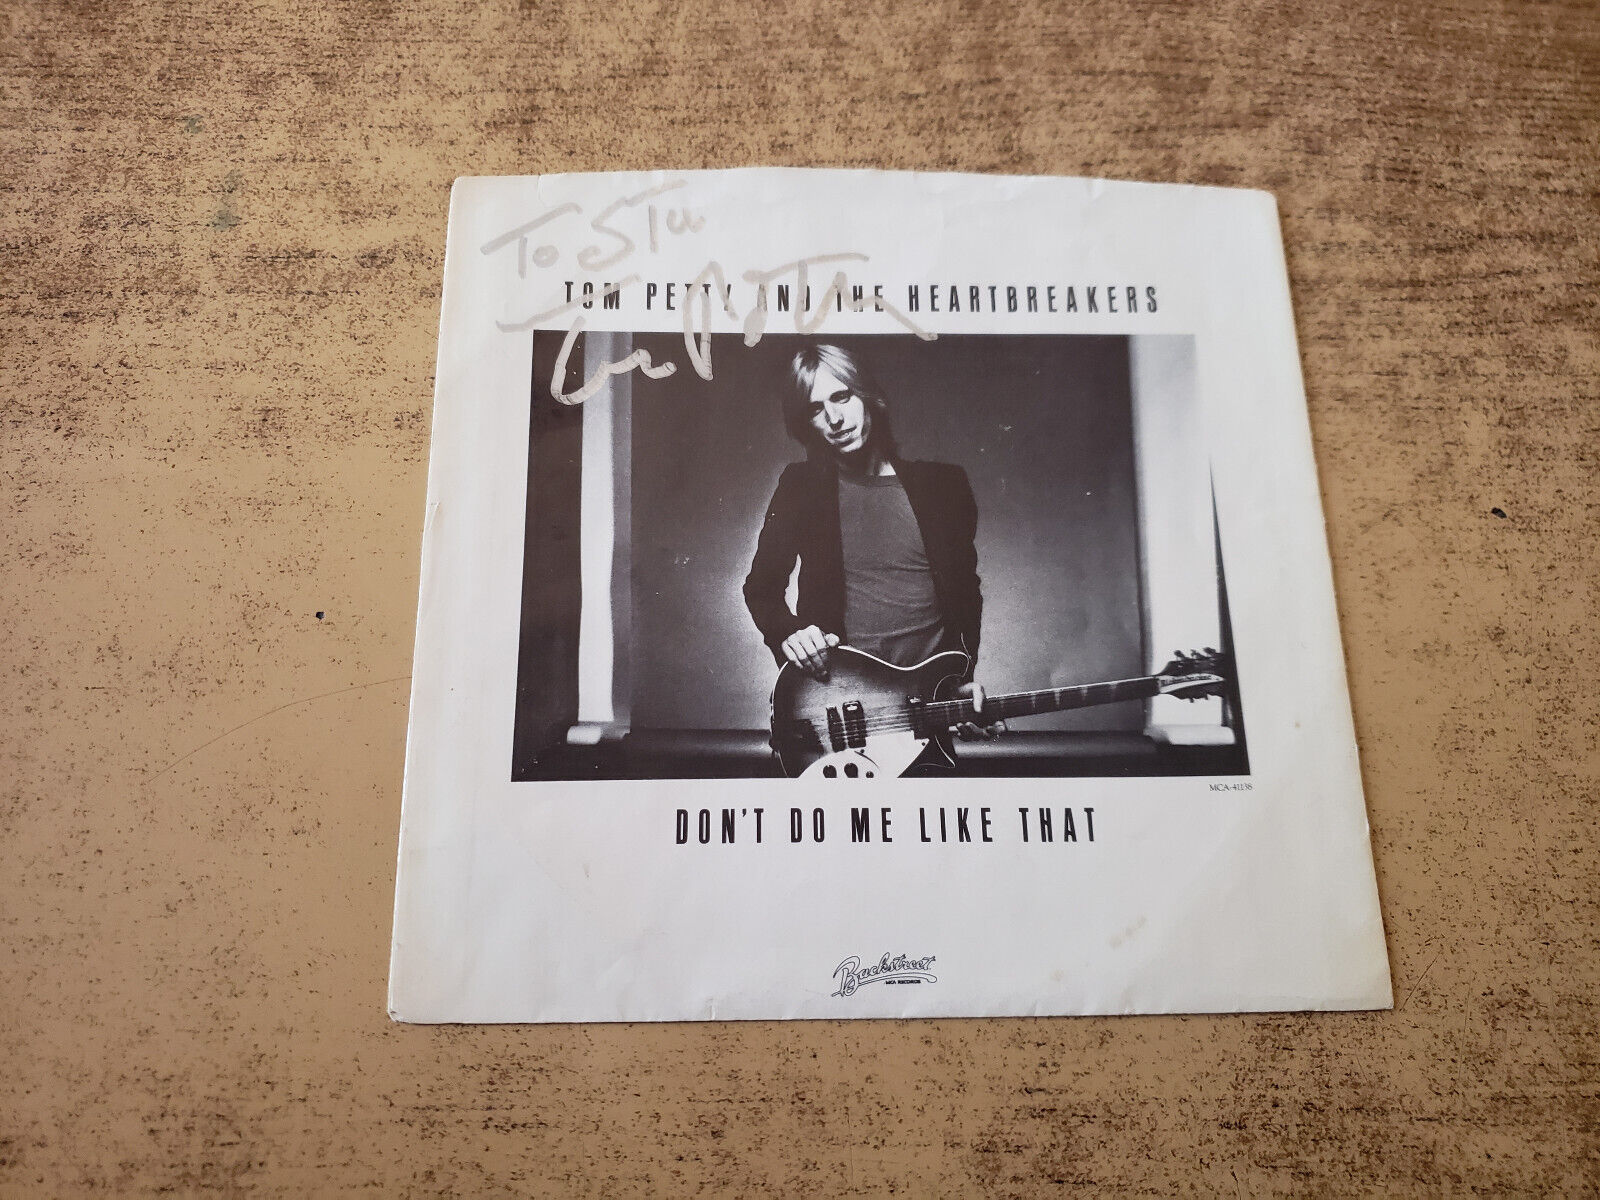 SIGNED SLEEVE ONLY 1980s vg+ TOM PETTY Don\'t Do Me Like That 45 SLEEVE 41138